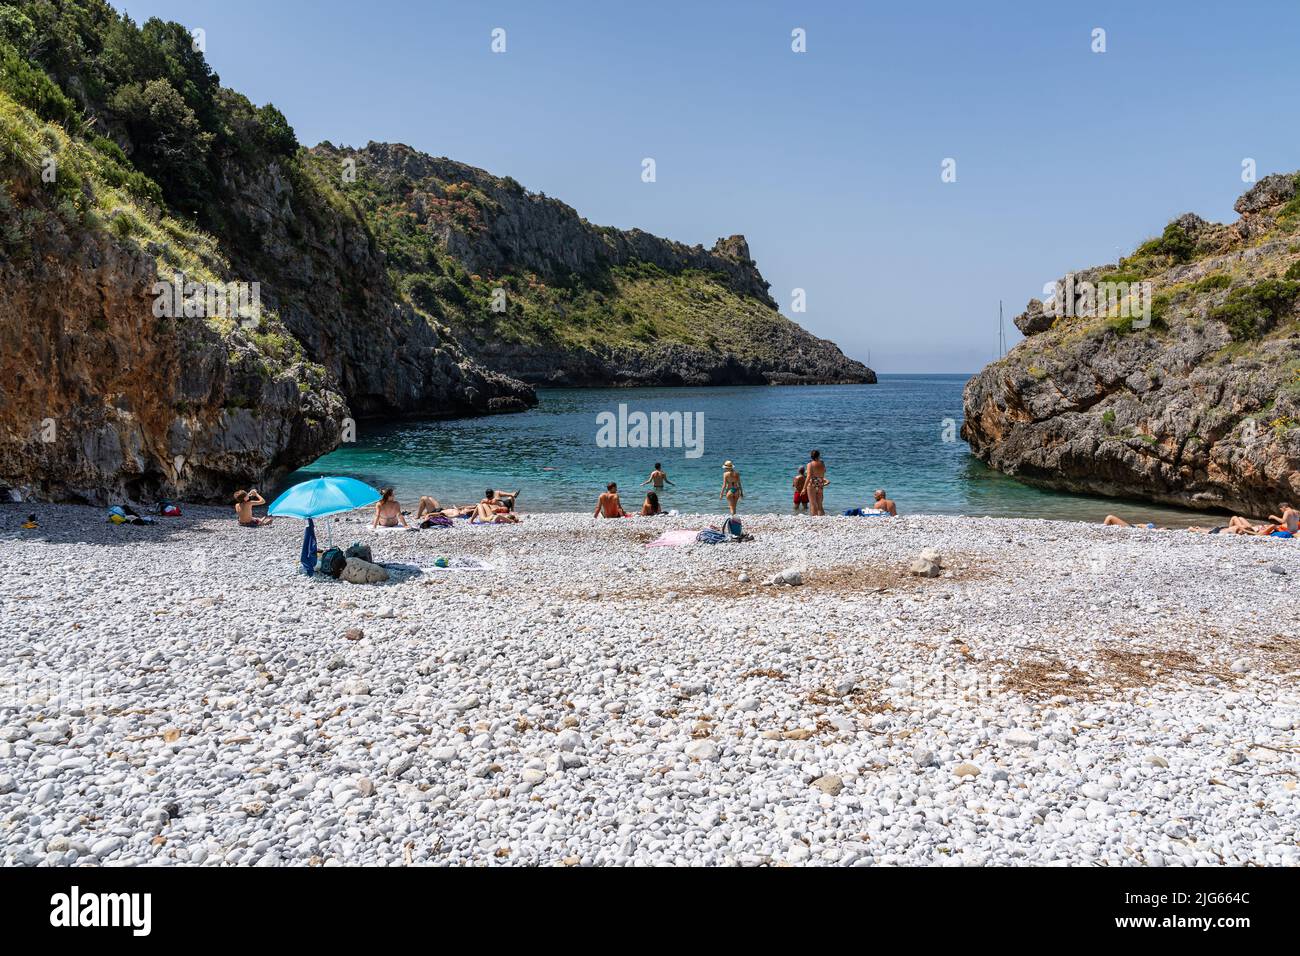 View of Cala Bianca beach at Cilento National Park, one of the most beautiful beach in Italy. Marina di Camerota, Campania, Italy, June 2022 Stock Photo